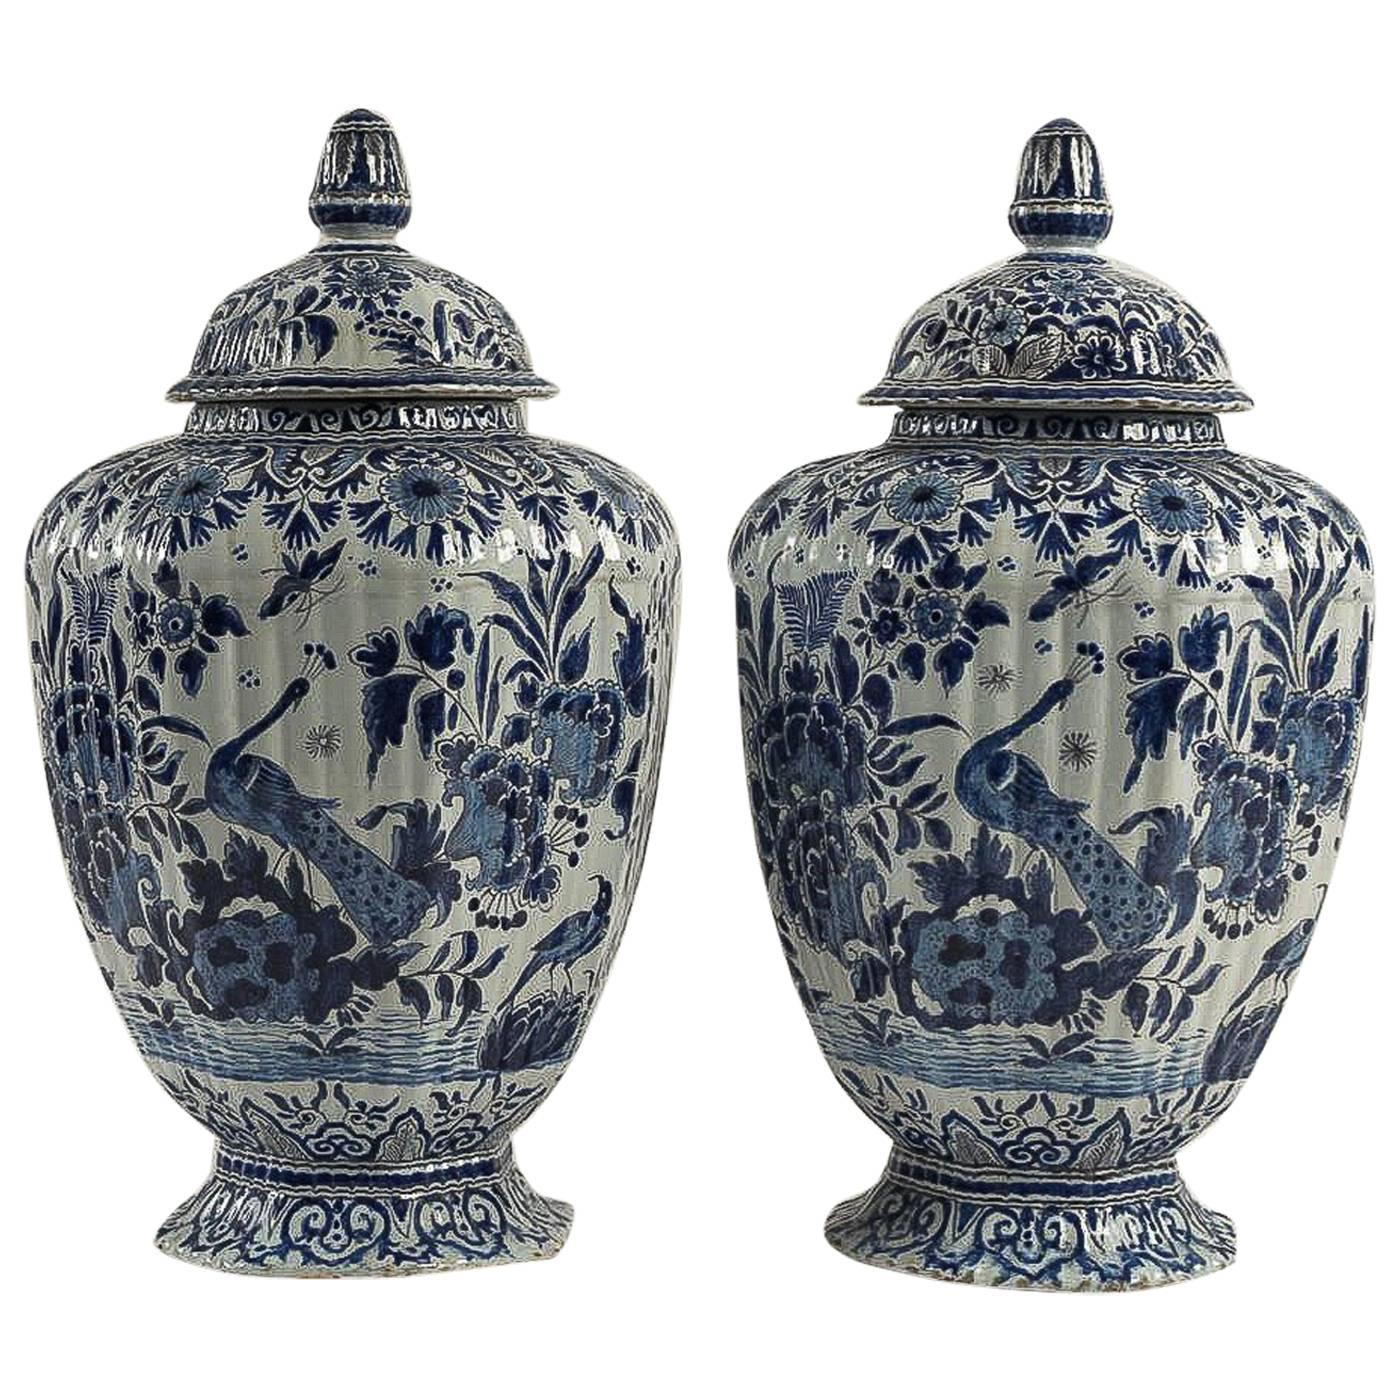 Netherlands Early 19th Century Pair of Delft Vases, Circa 1820-1840